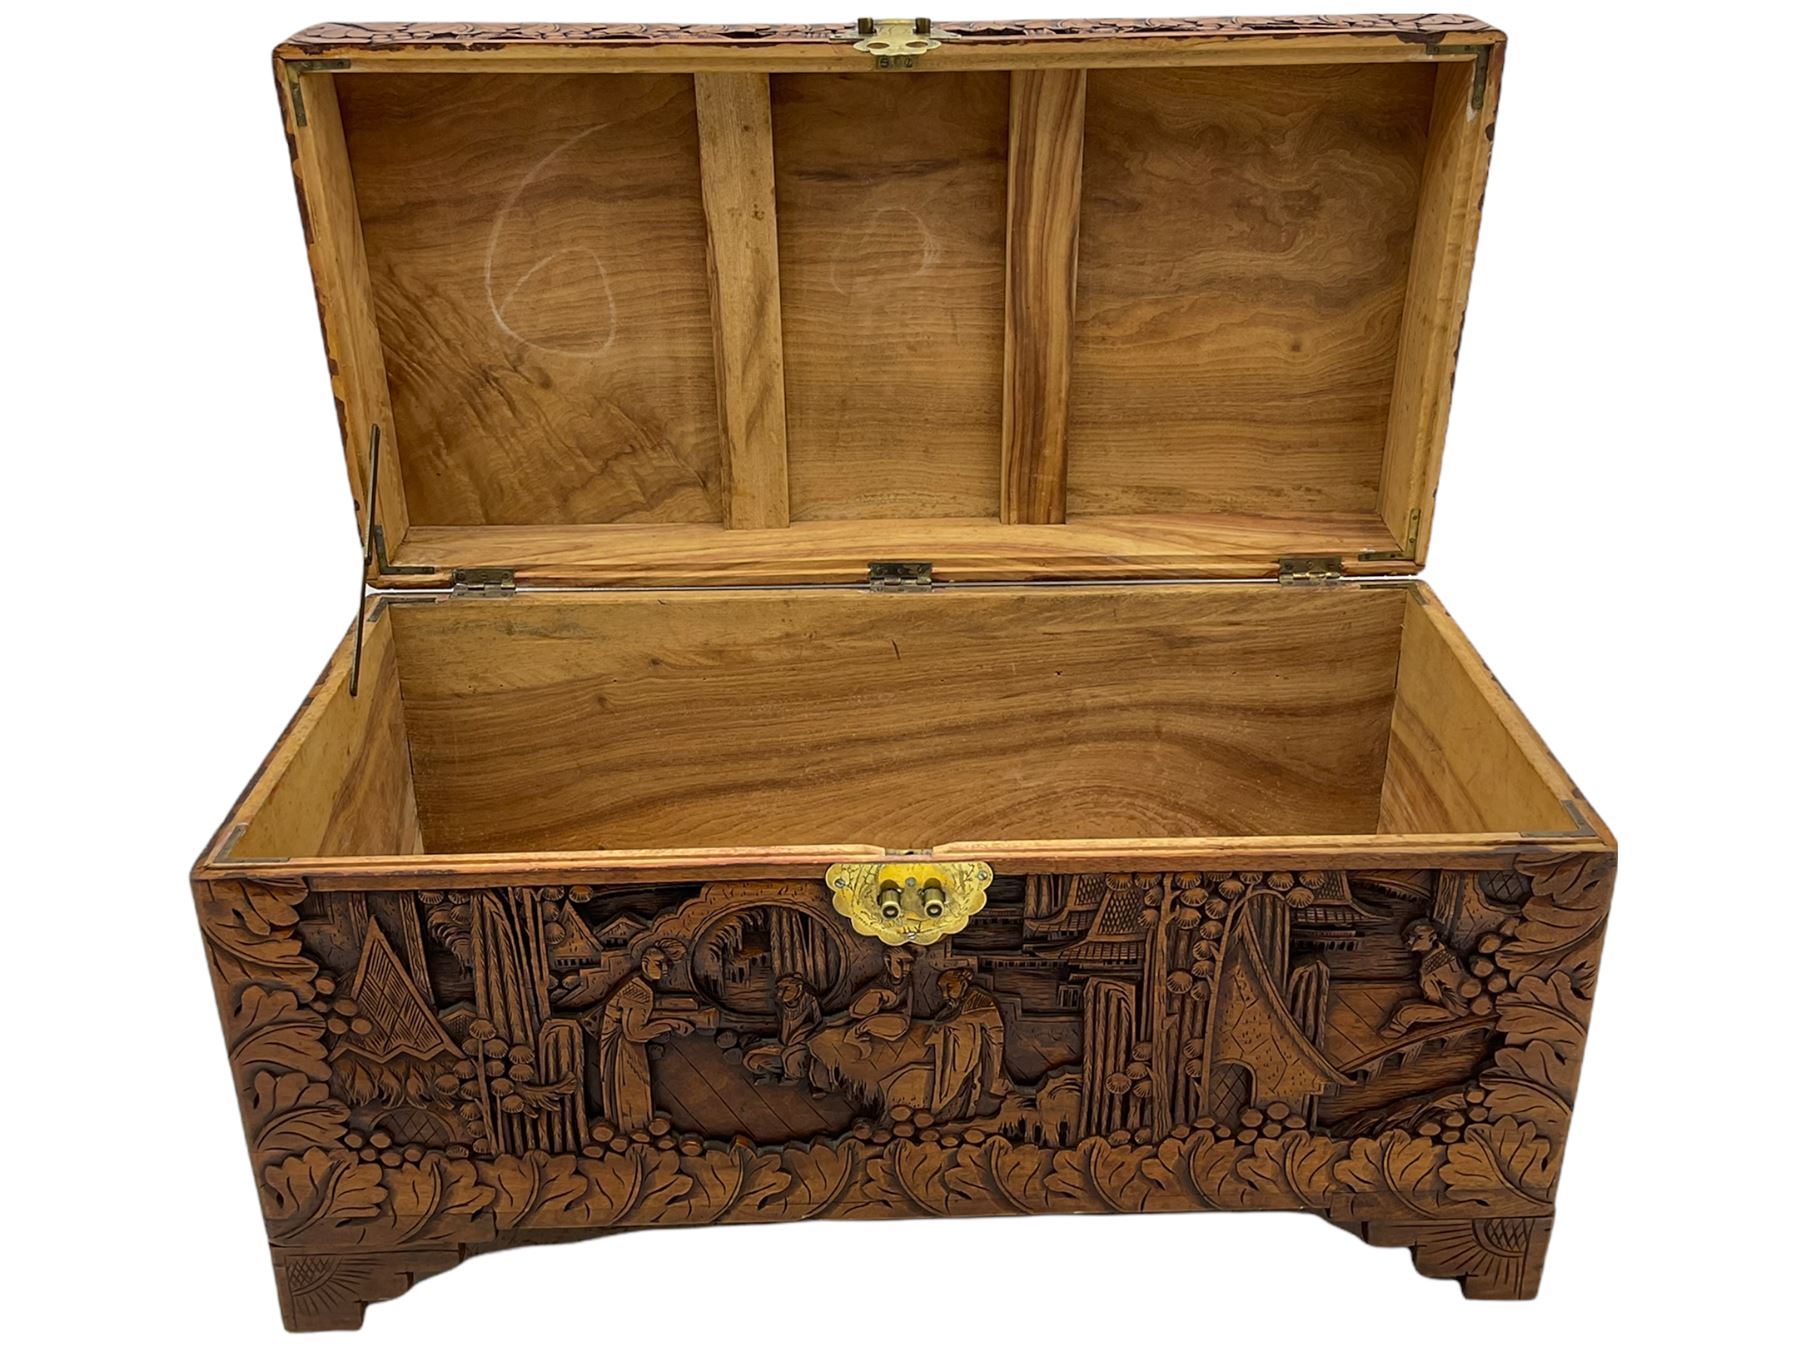 Chinese carved camphor wood blanket chest - Image 6 of 6